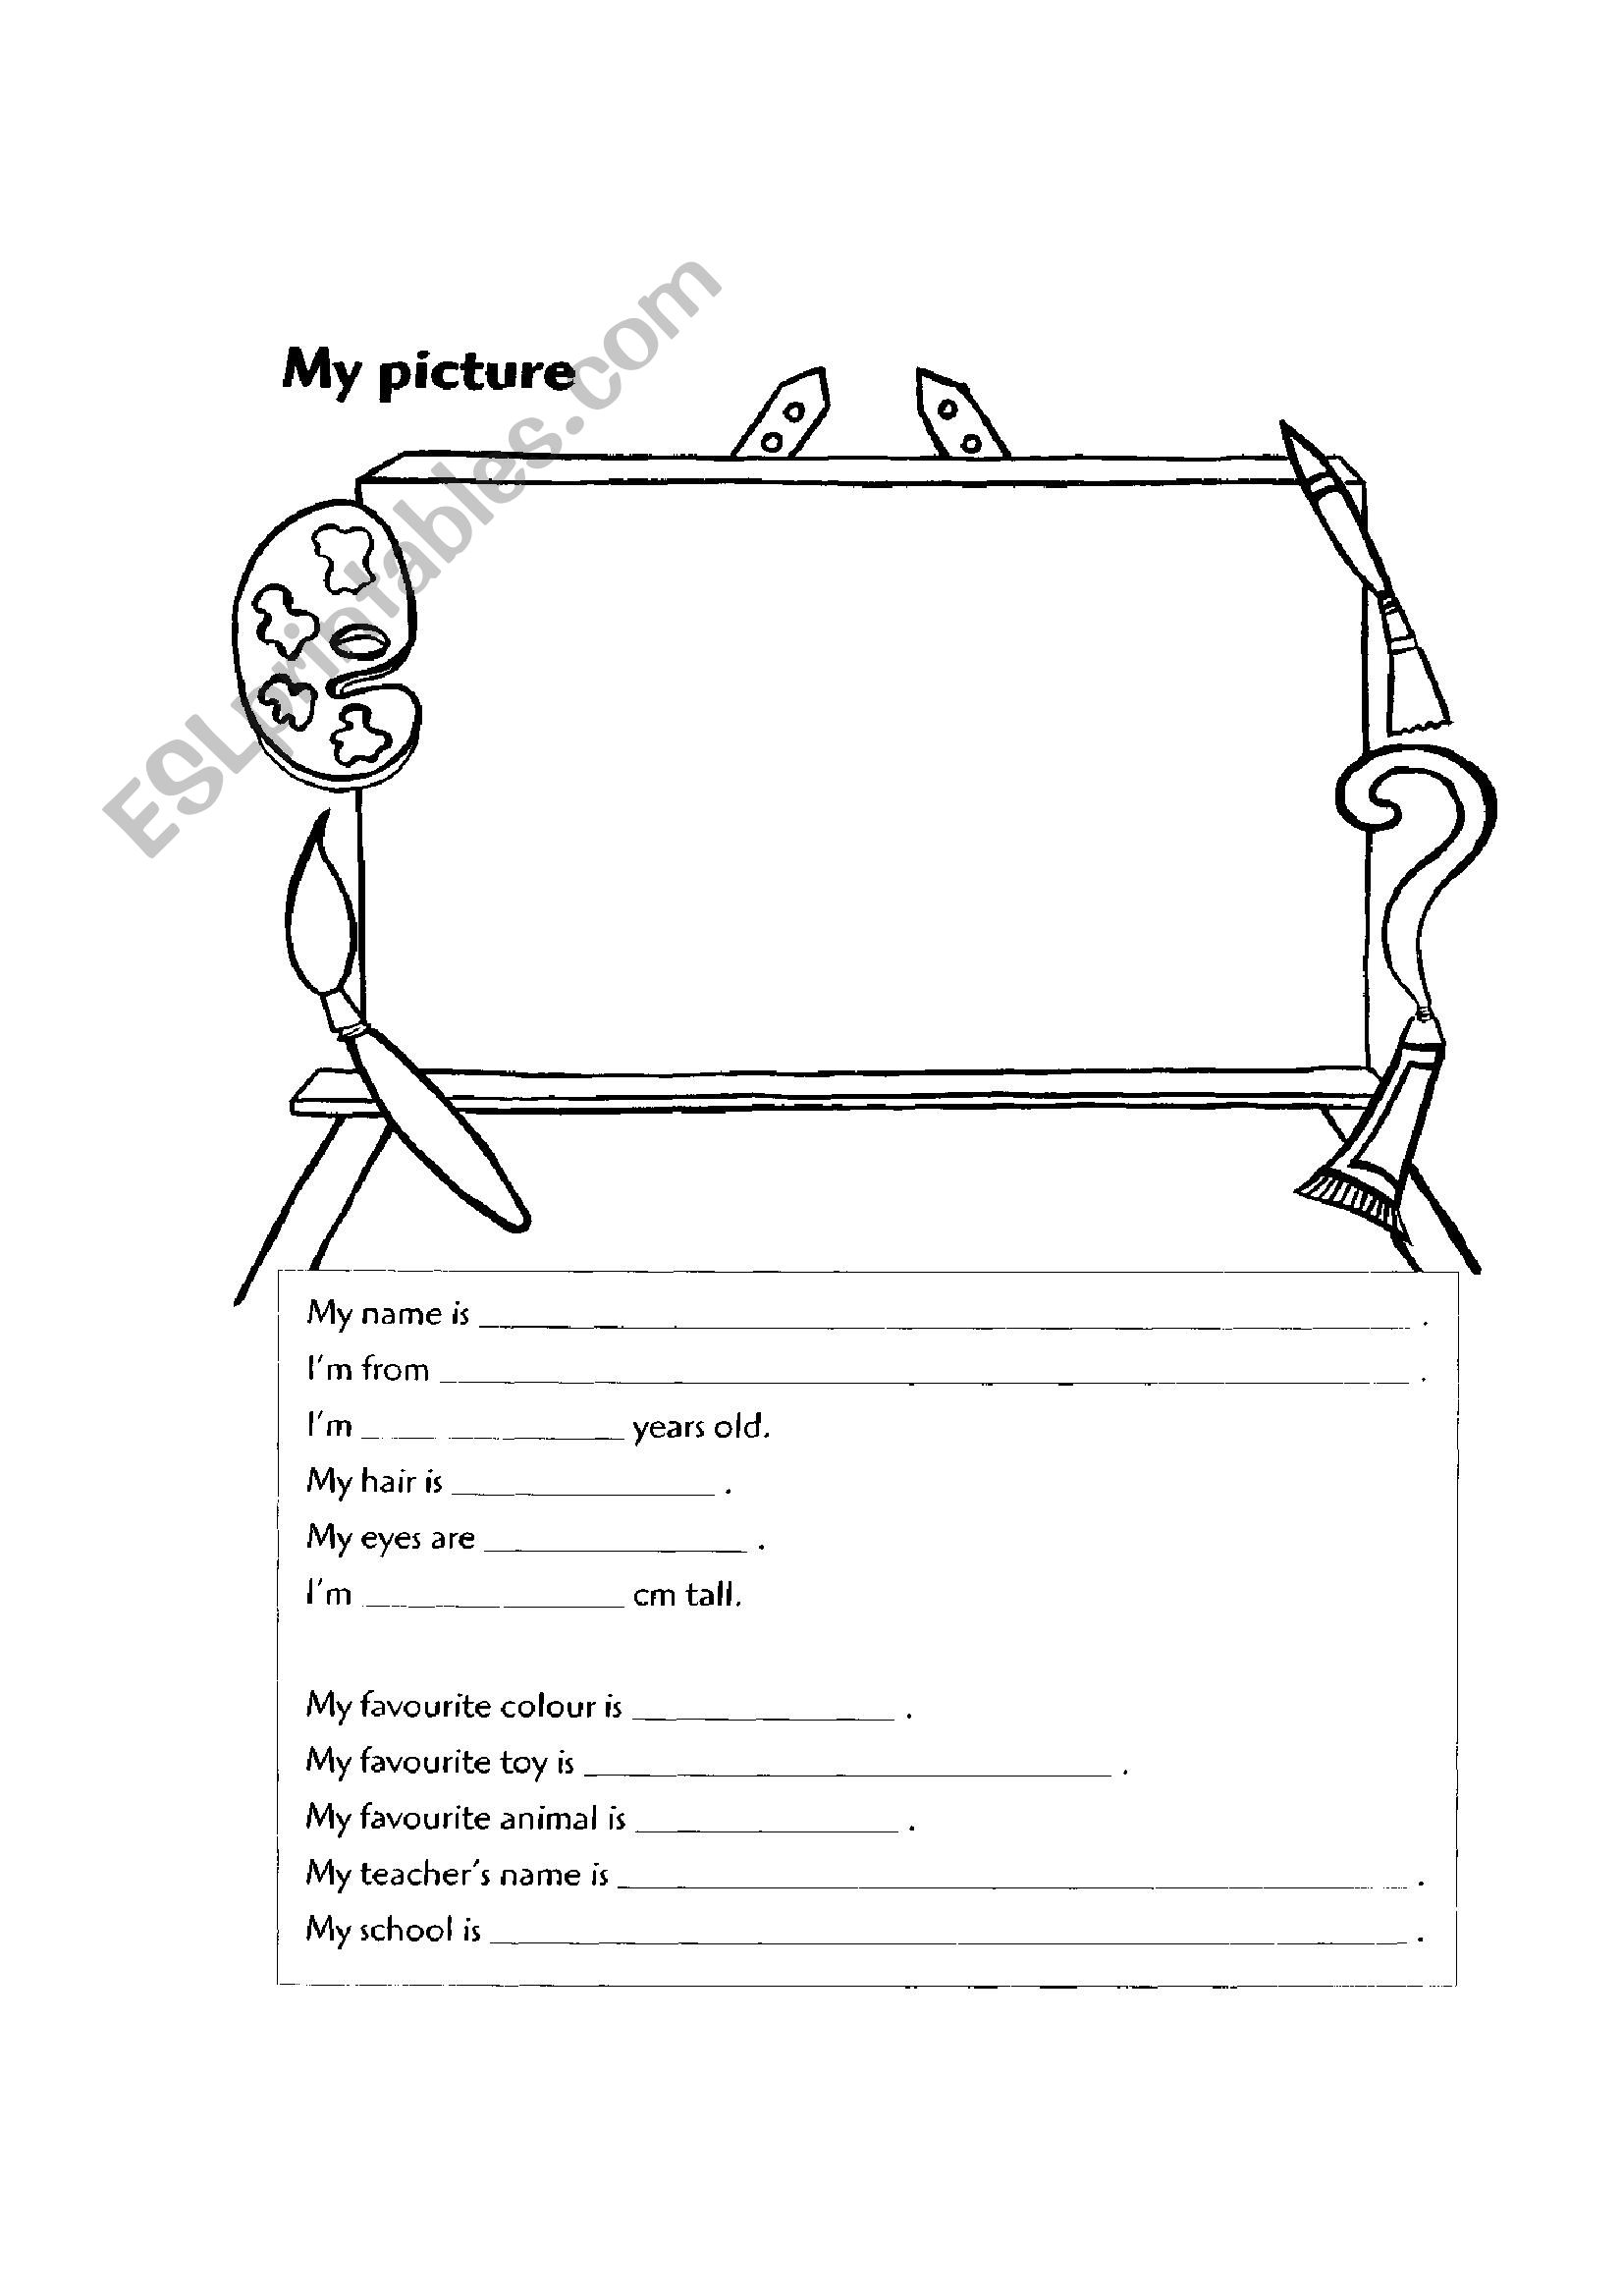 My picture worksheet